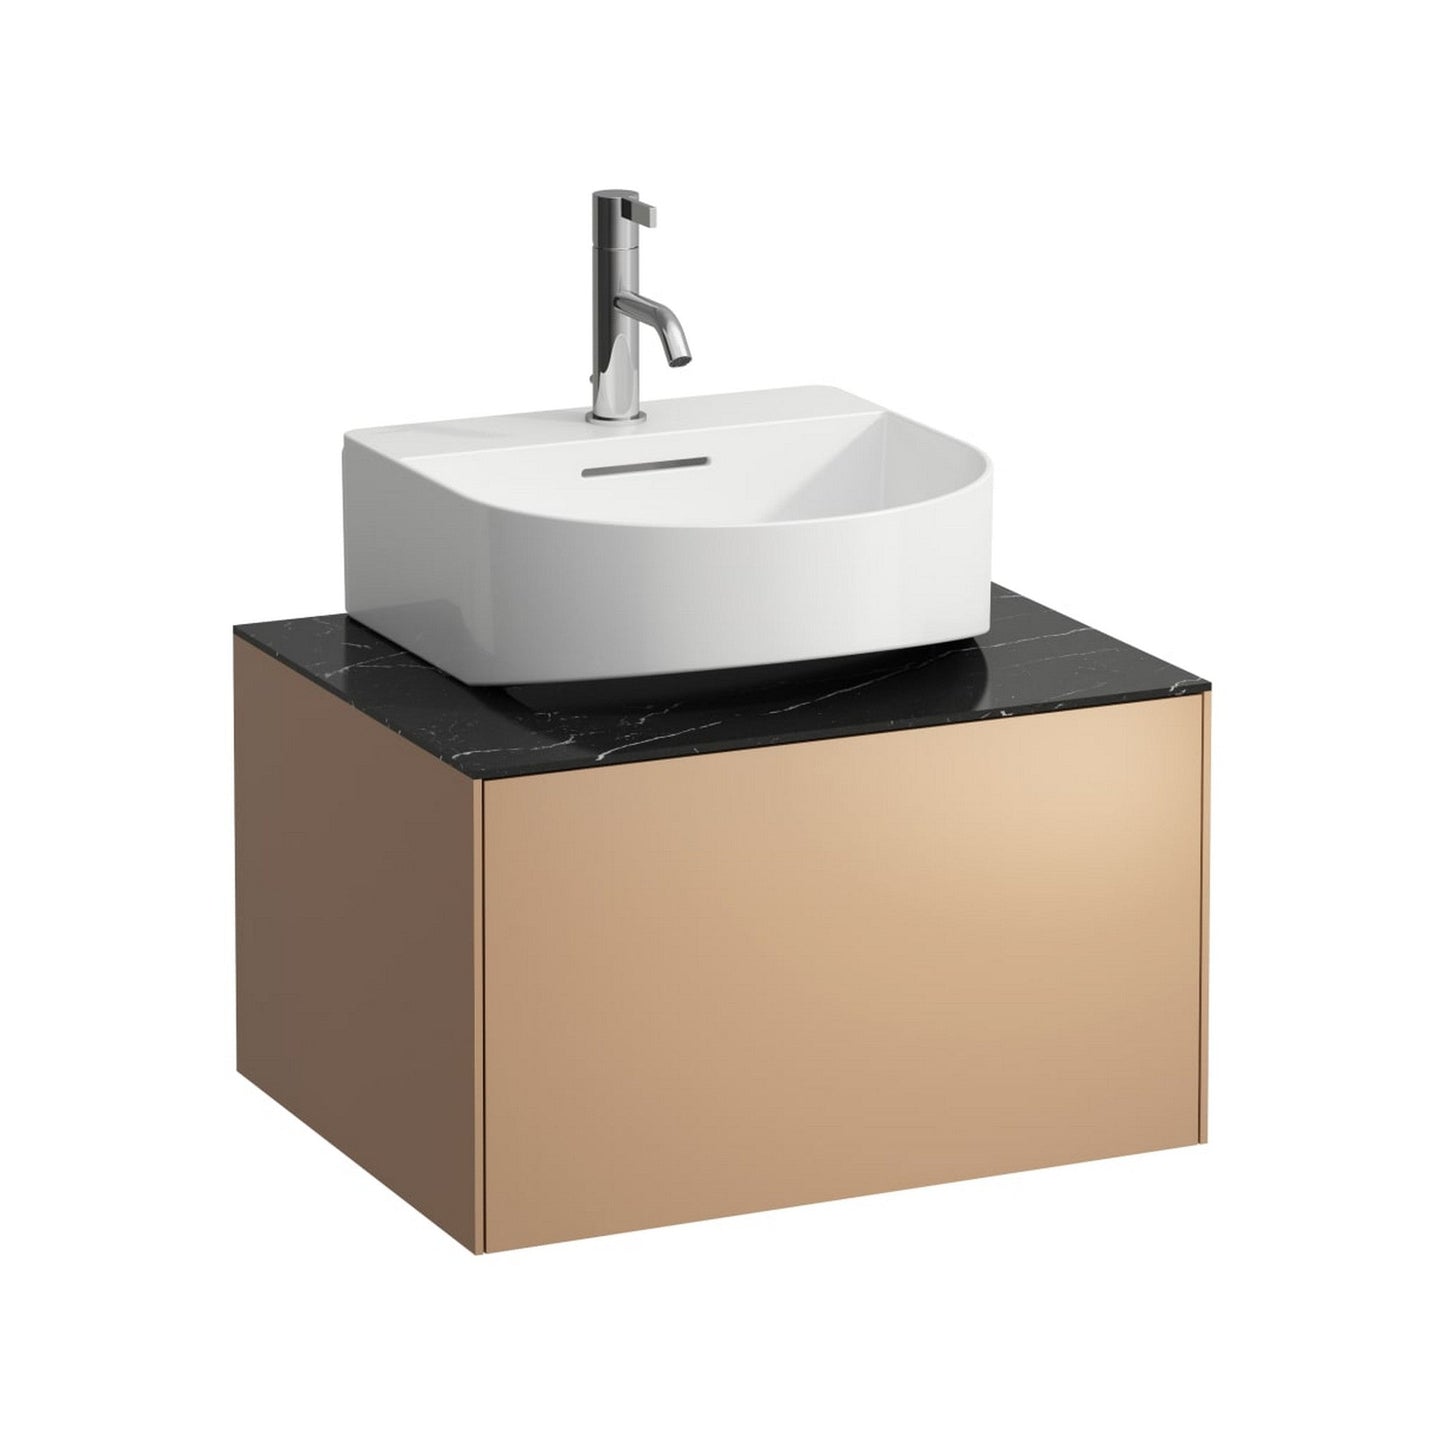 Laufen Sonar 23" 1-Drawer Copper Wall-Mounted Vanity With Nero Marquina Marble Top, Center Sink Cut-out for Sonar Bathroom Sink Model: H816341